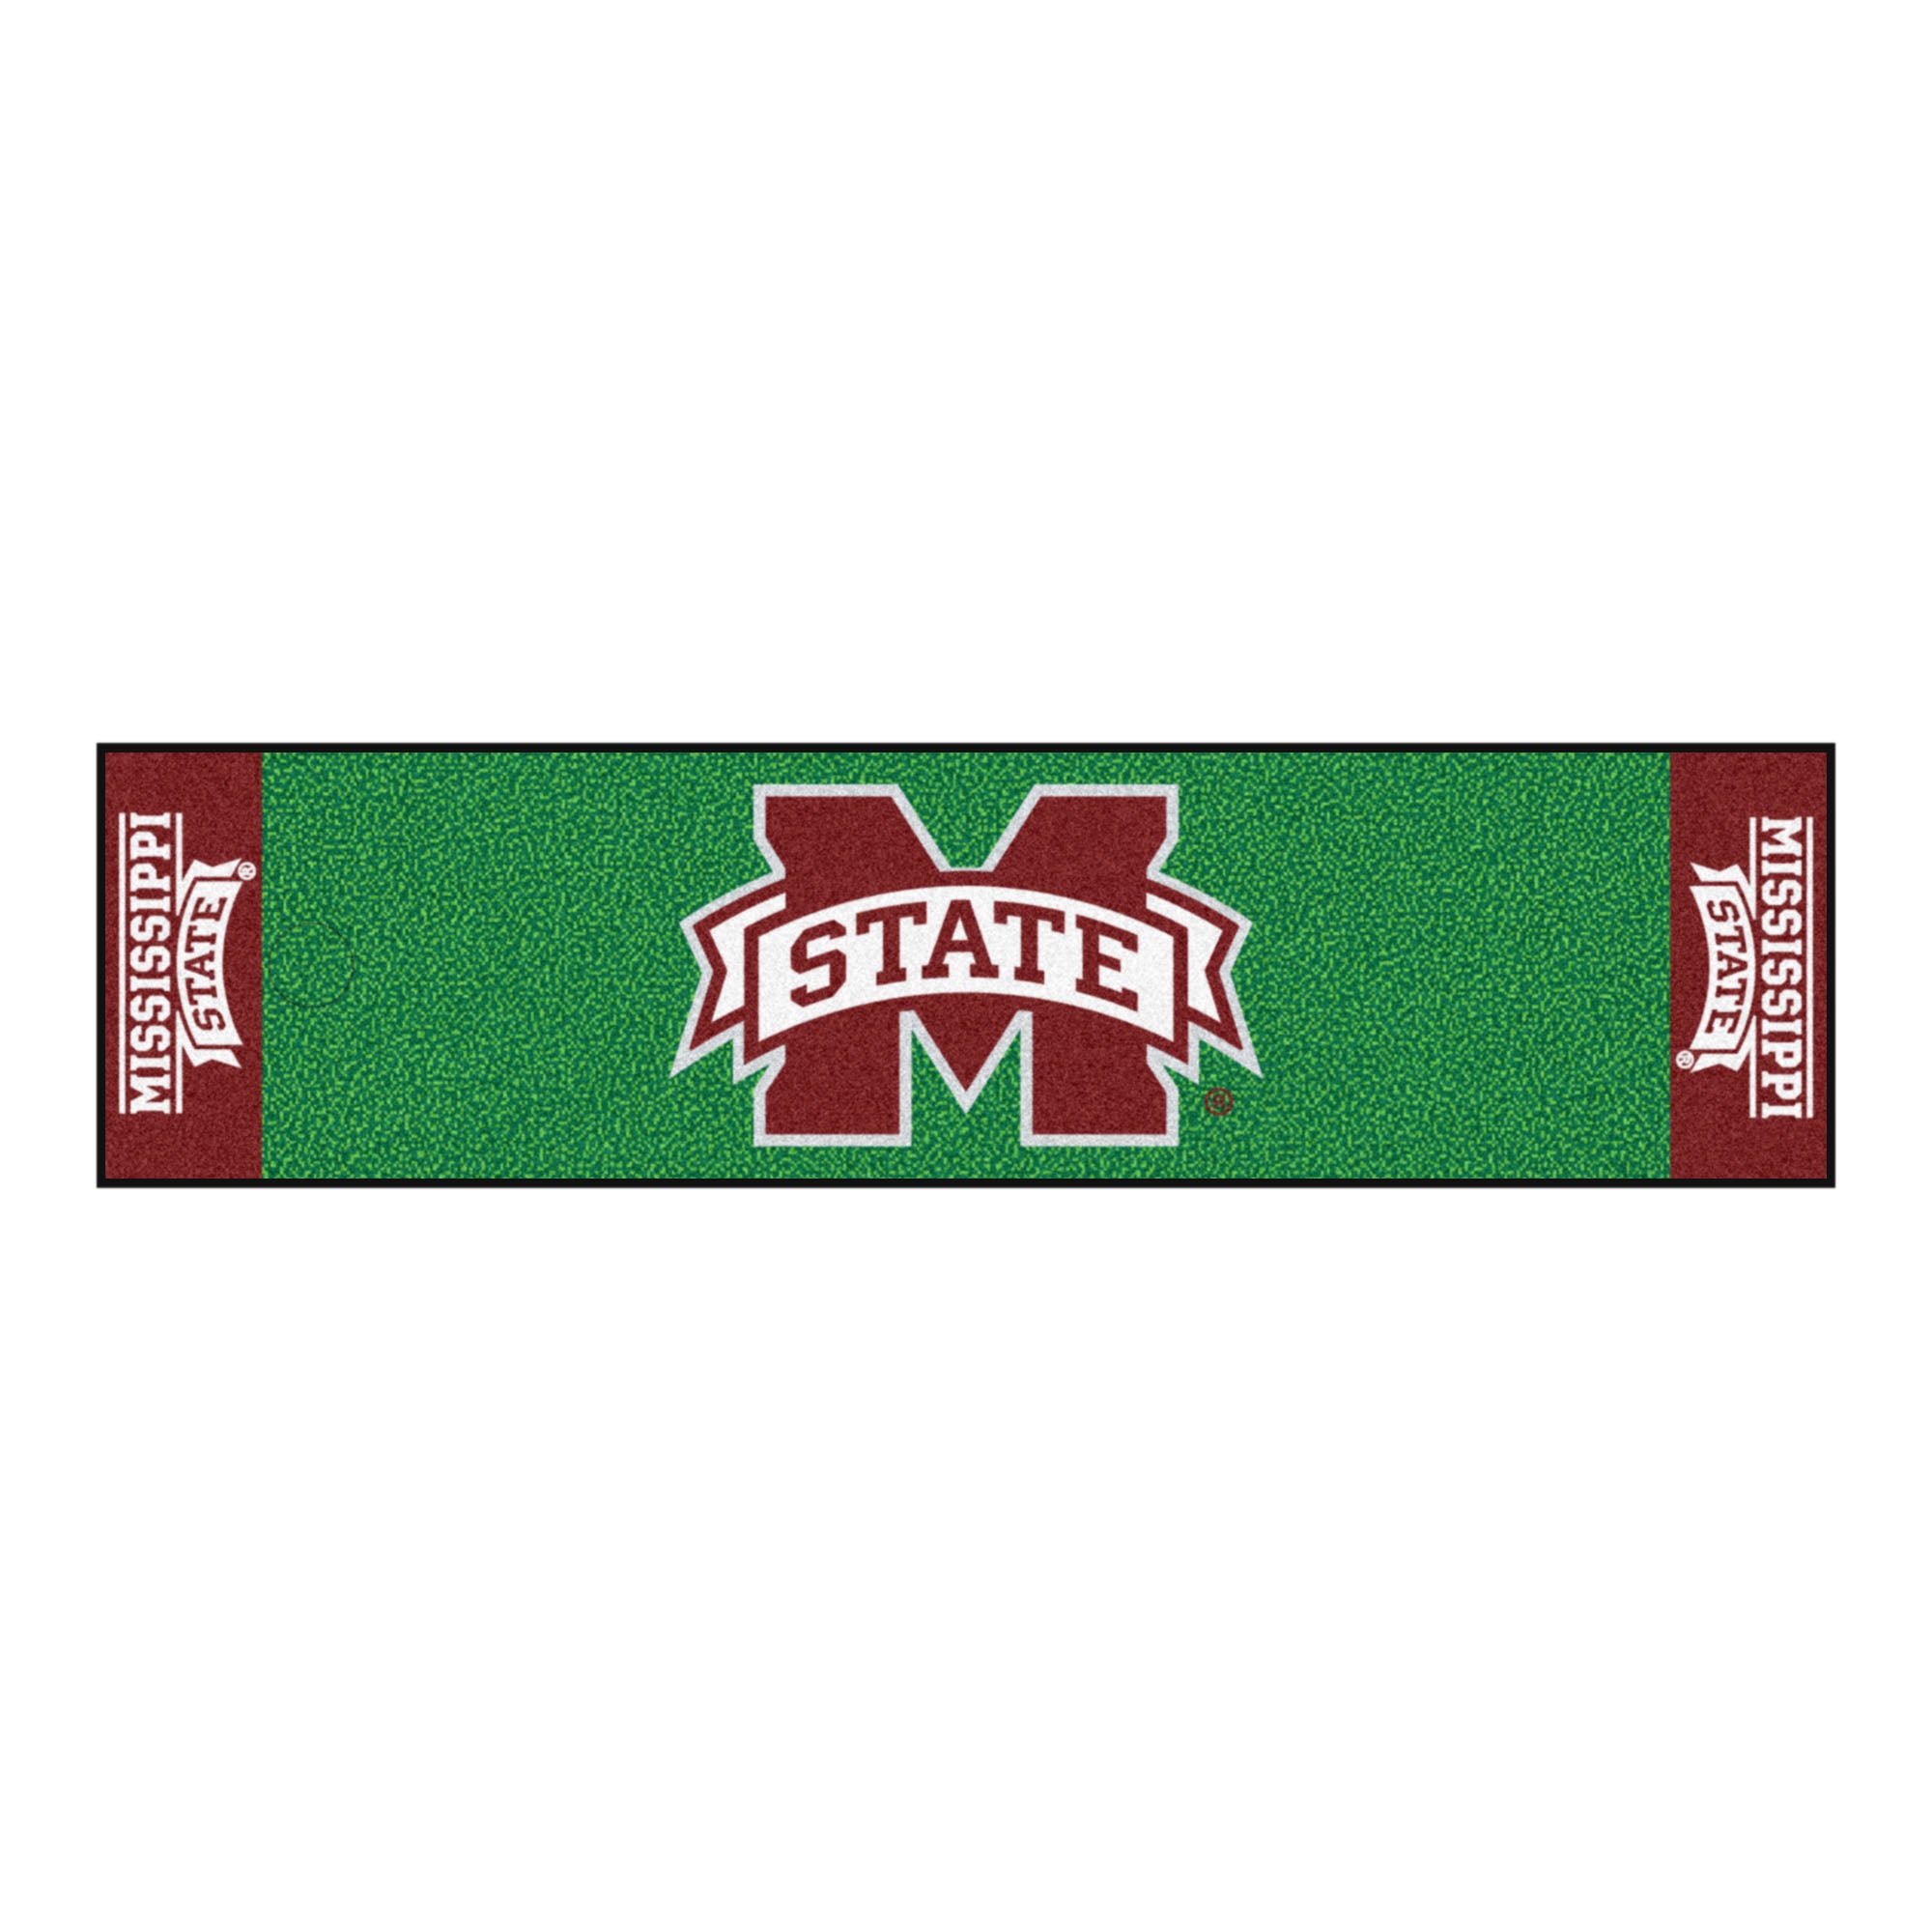 FANMATS, Mississippi State University Putting Green Mat - 1.5ft. x 6ft.